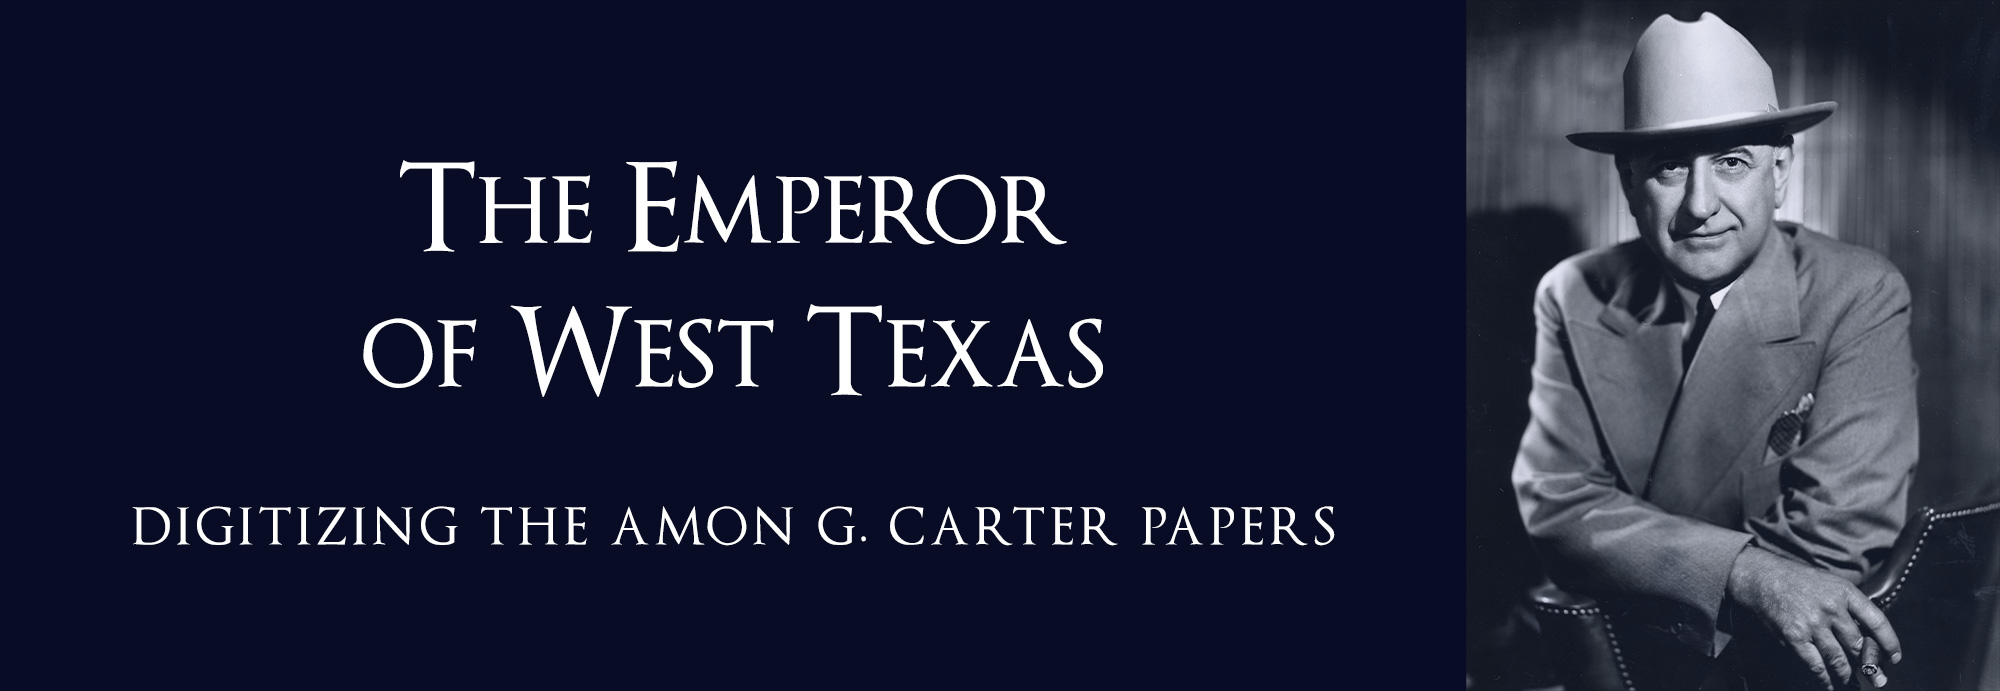 The Emperor of West Texas: Digitizing the Amon G. Carter Papers.